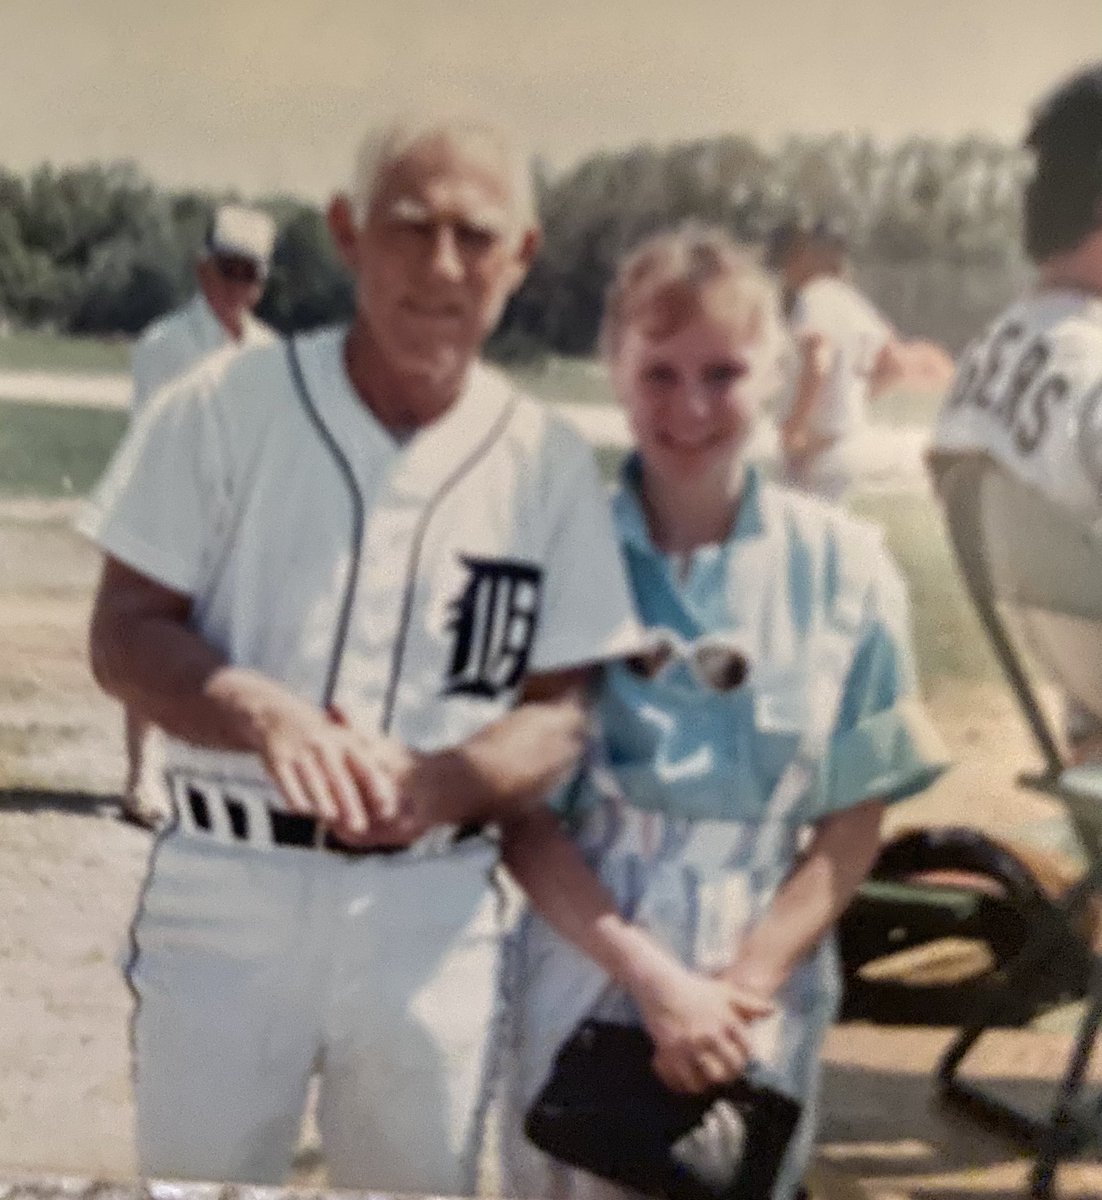 I am, in my heart of hearts, an @tigers fan. As Annie Savoy would say, I believe in the church of baseball. My grandpa Don introduced me to Sparky. ❤️. Best day ever. Happy Birthday Sparky.